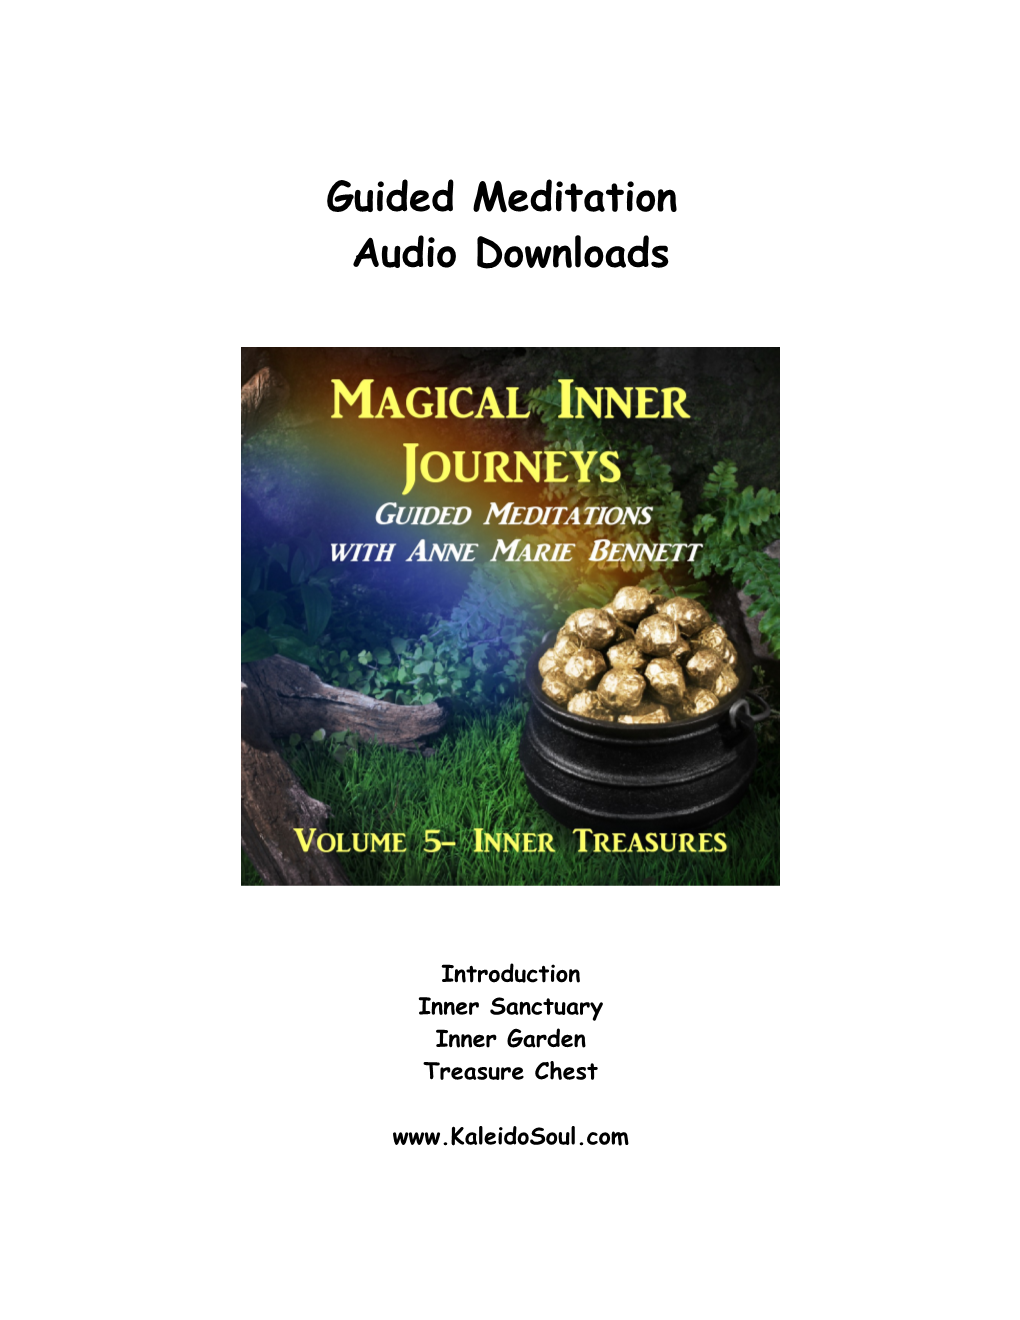 Guided Meditation Audio Downloads